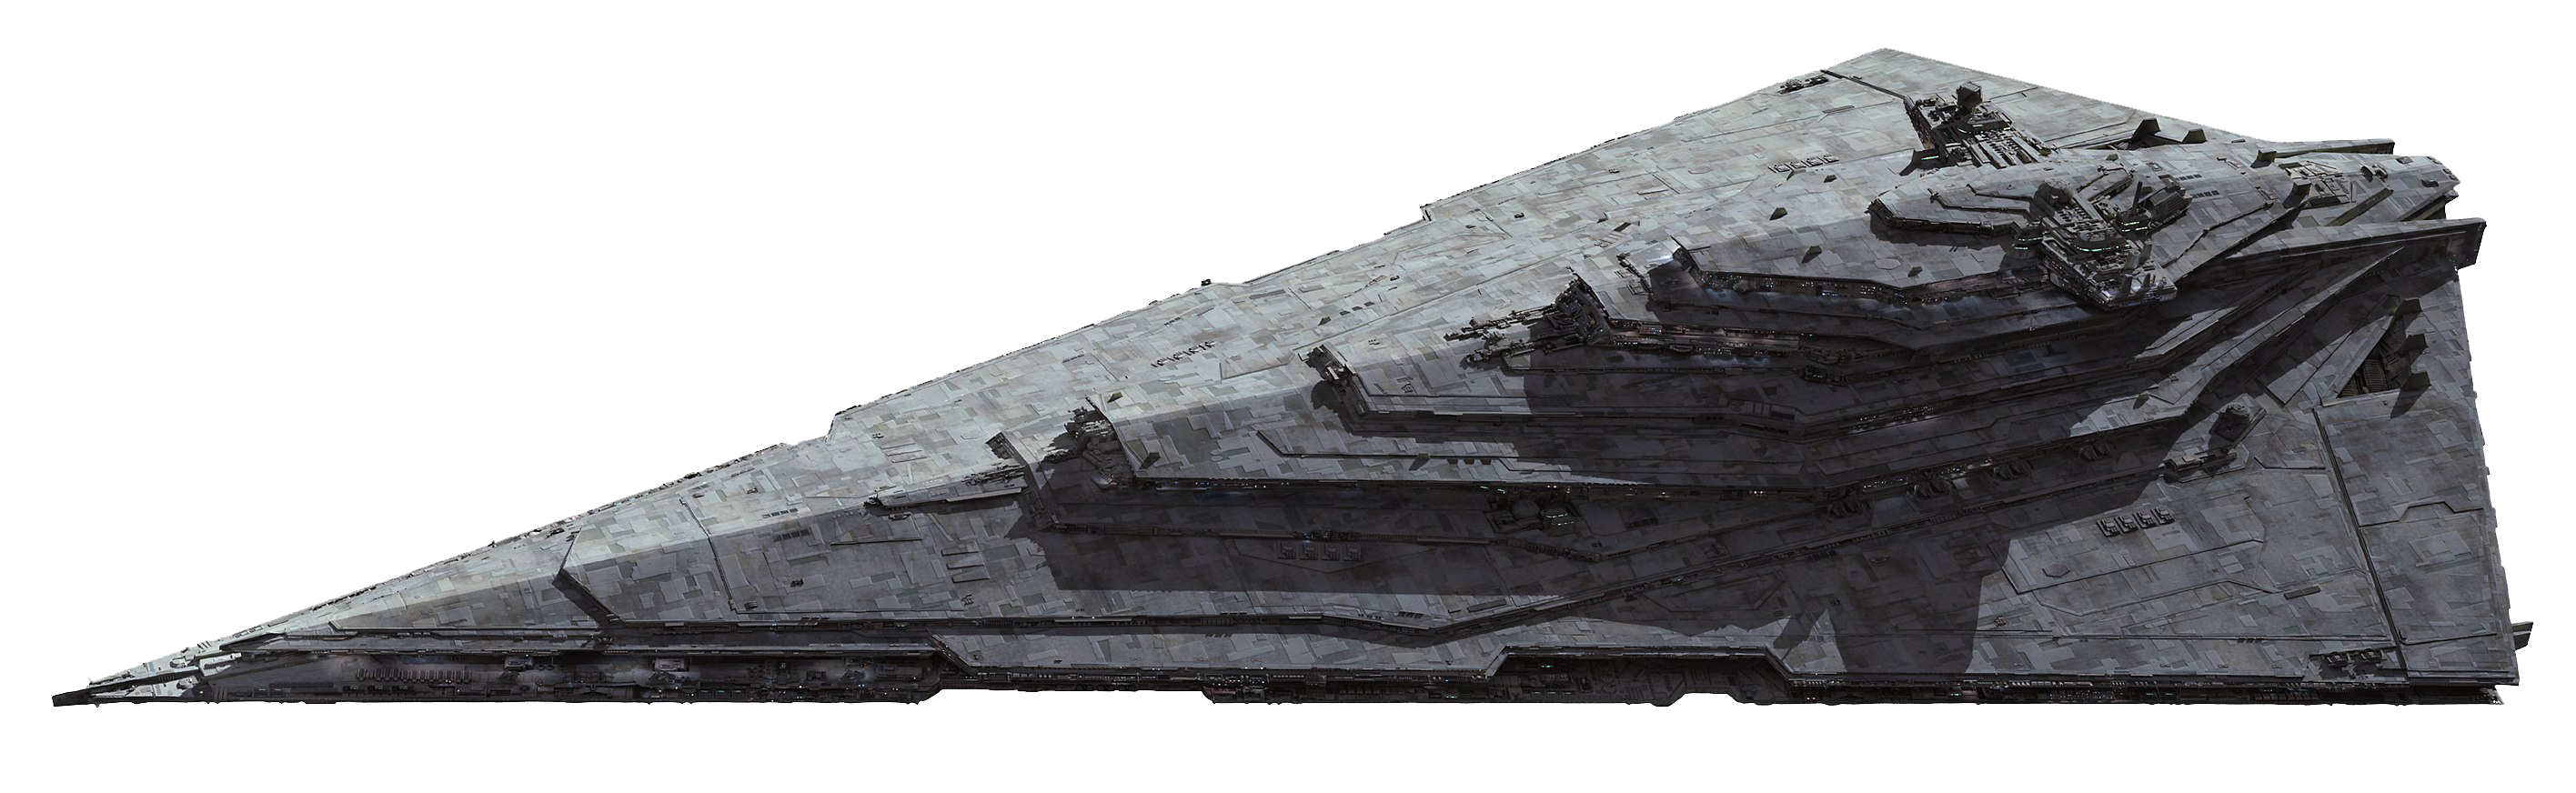 Star Destroyers PNG Images HD